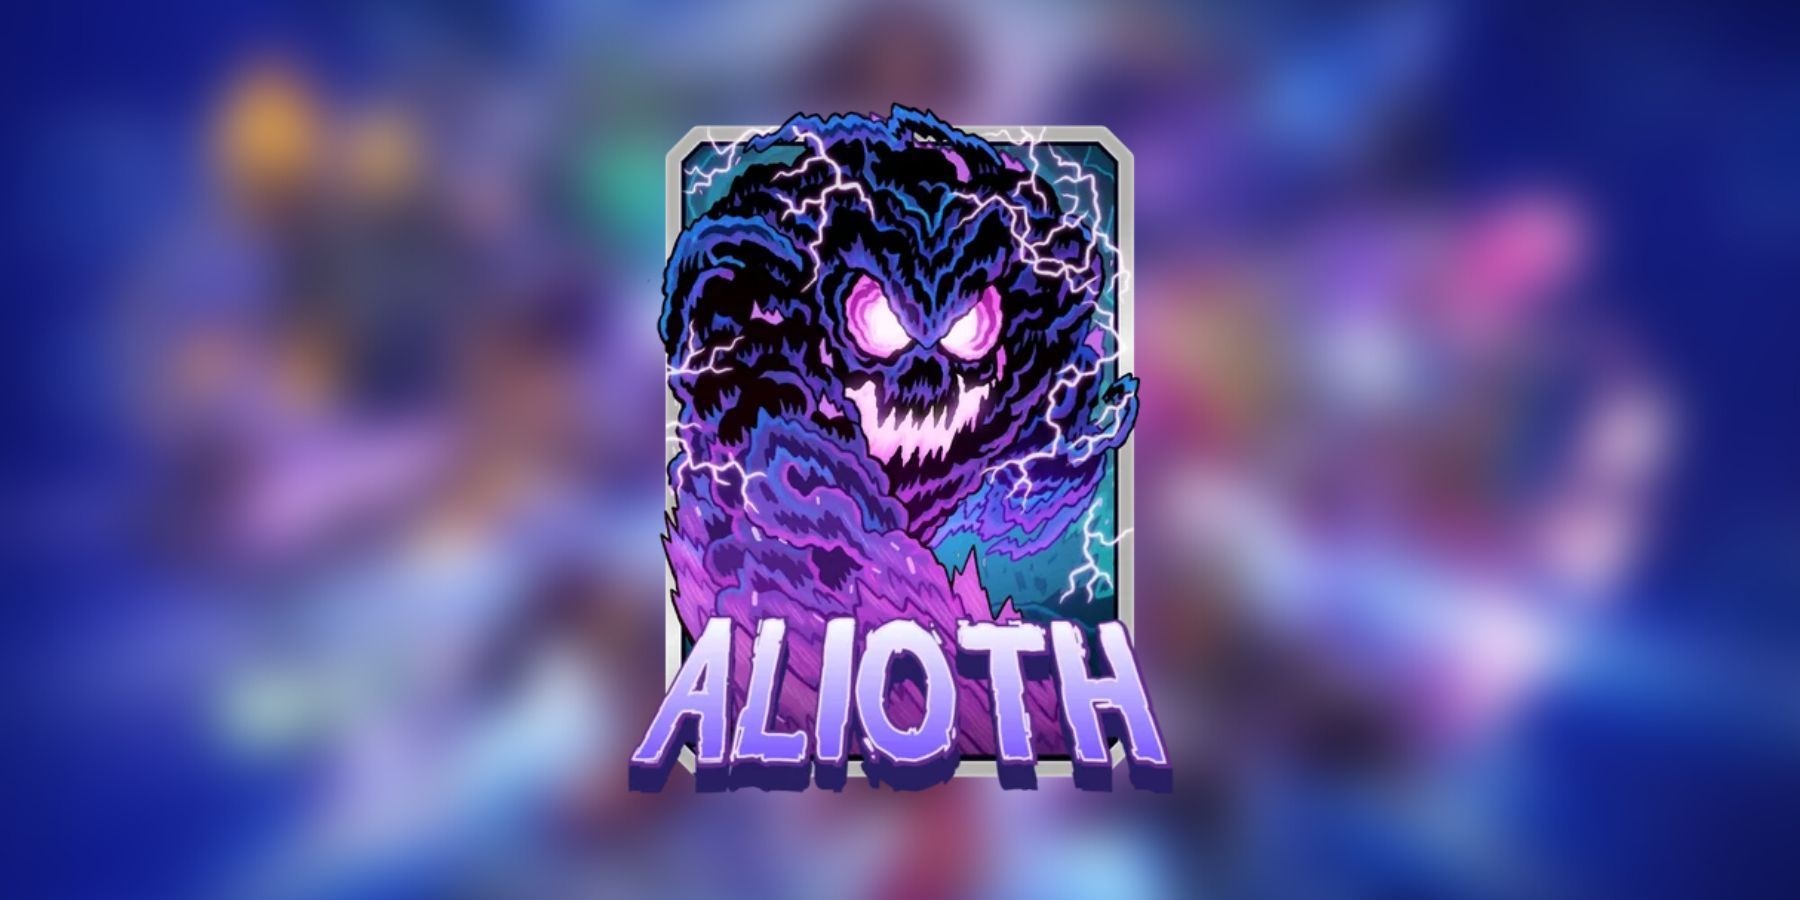 the alioth card in marvel snap. 